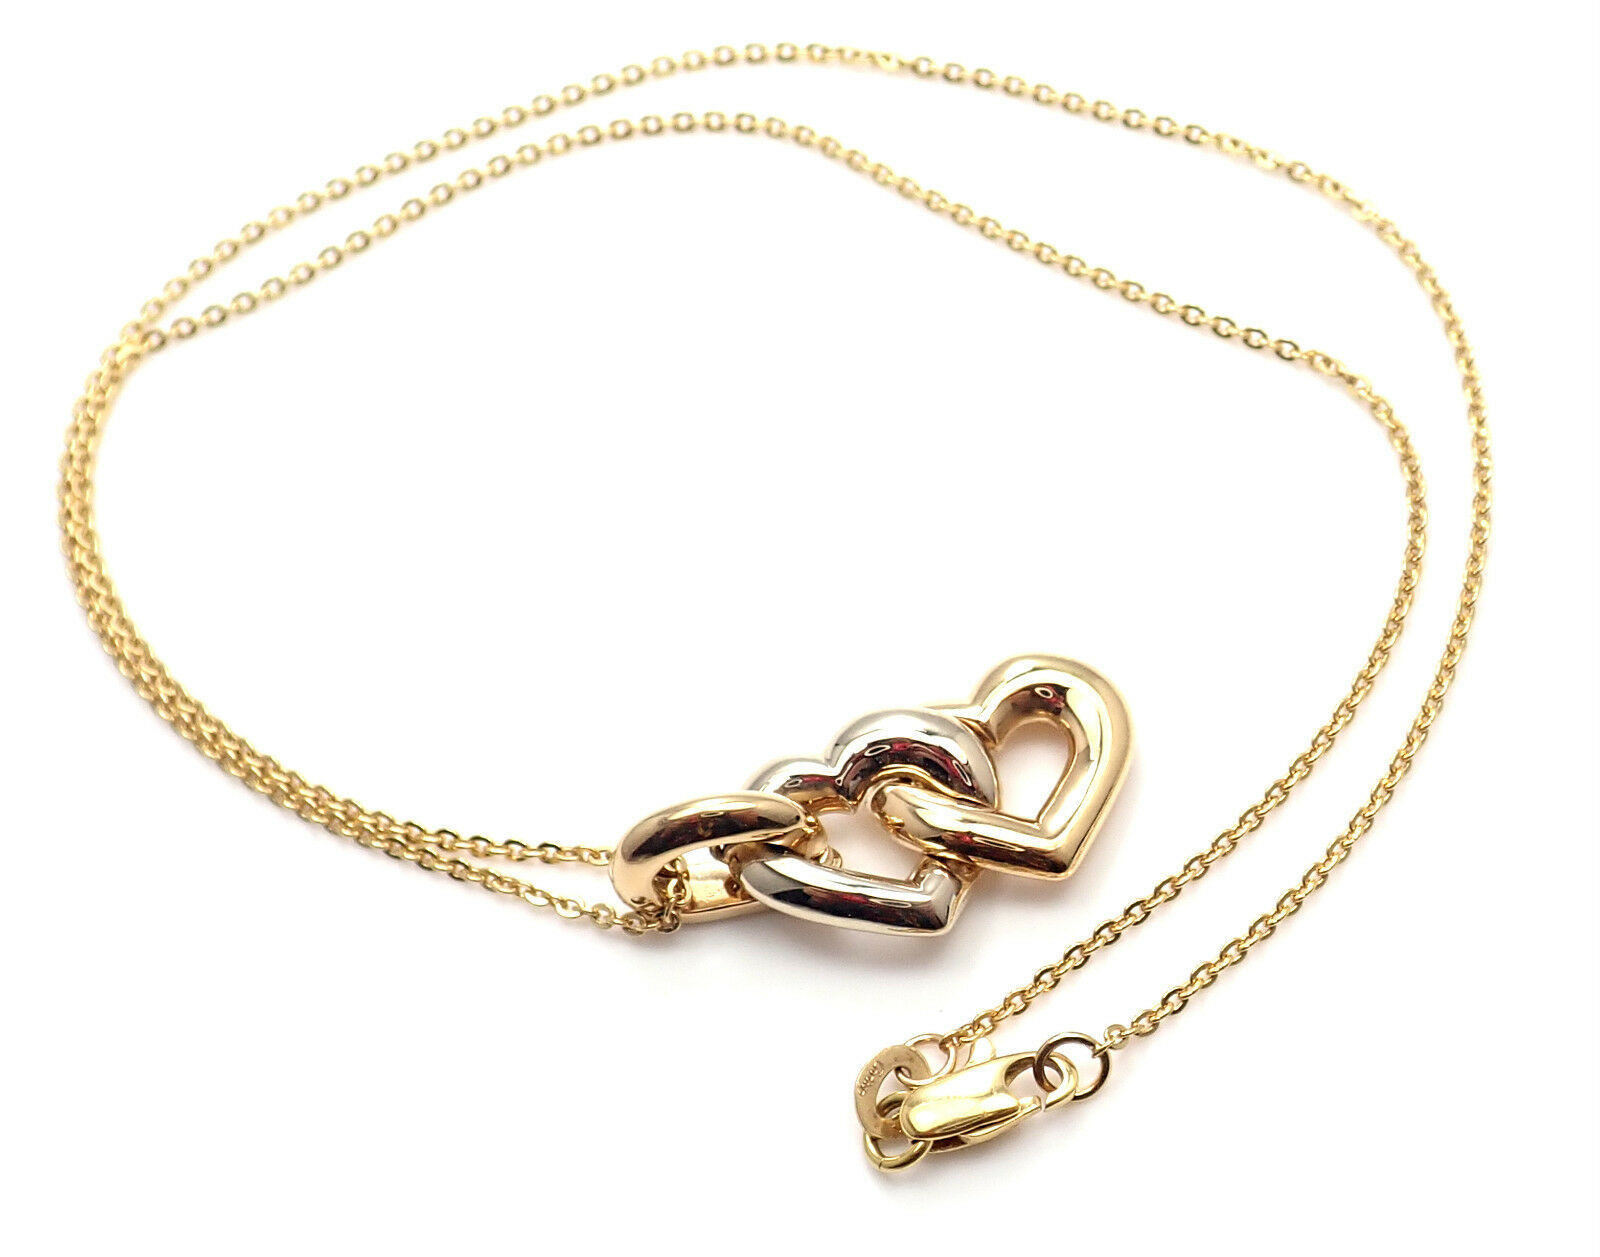 Authentic! Cartier 18K Yellow & White Gold Double Heart Pendant Chain Necklace - $2,268.00